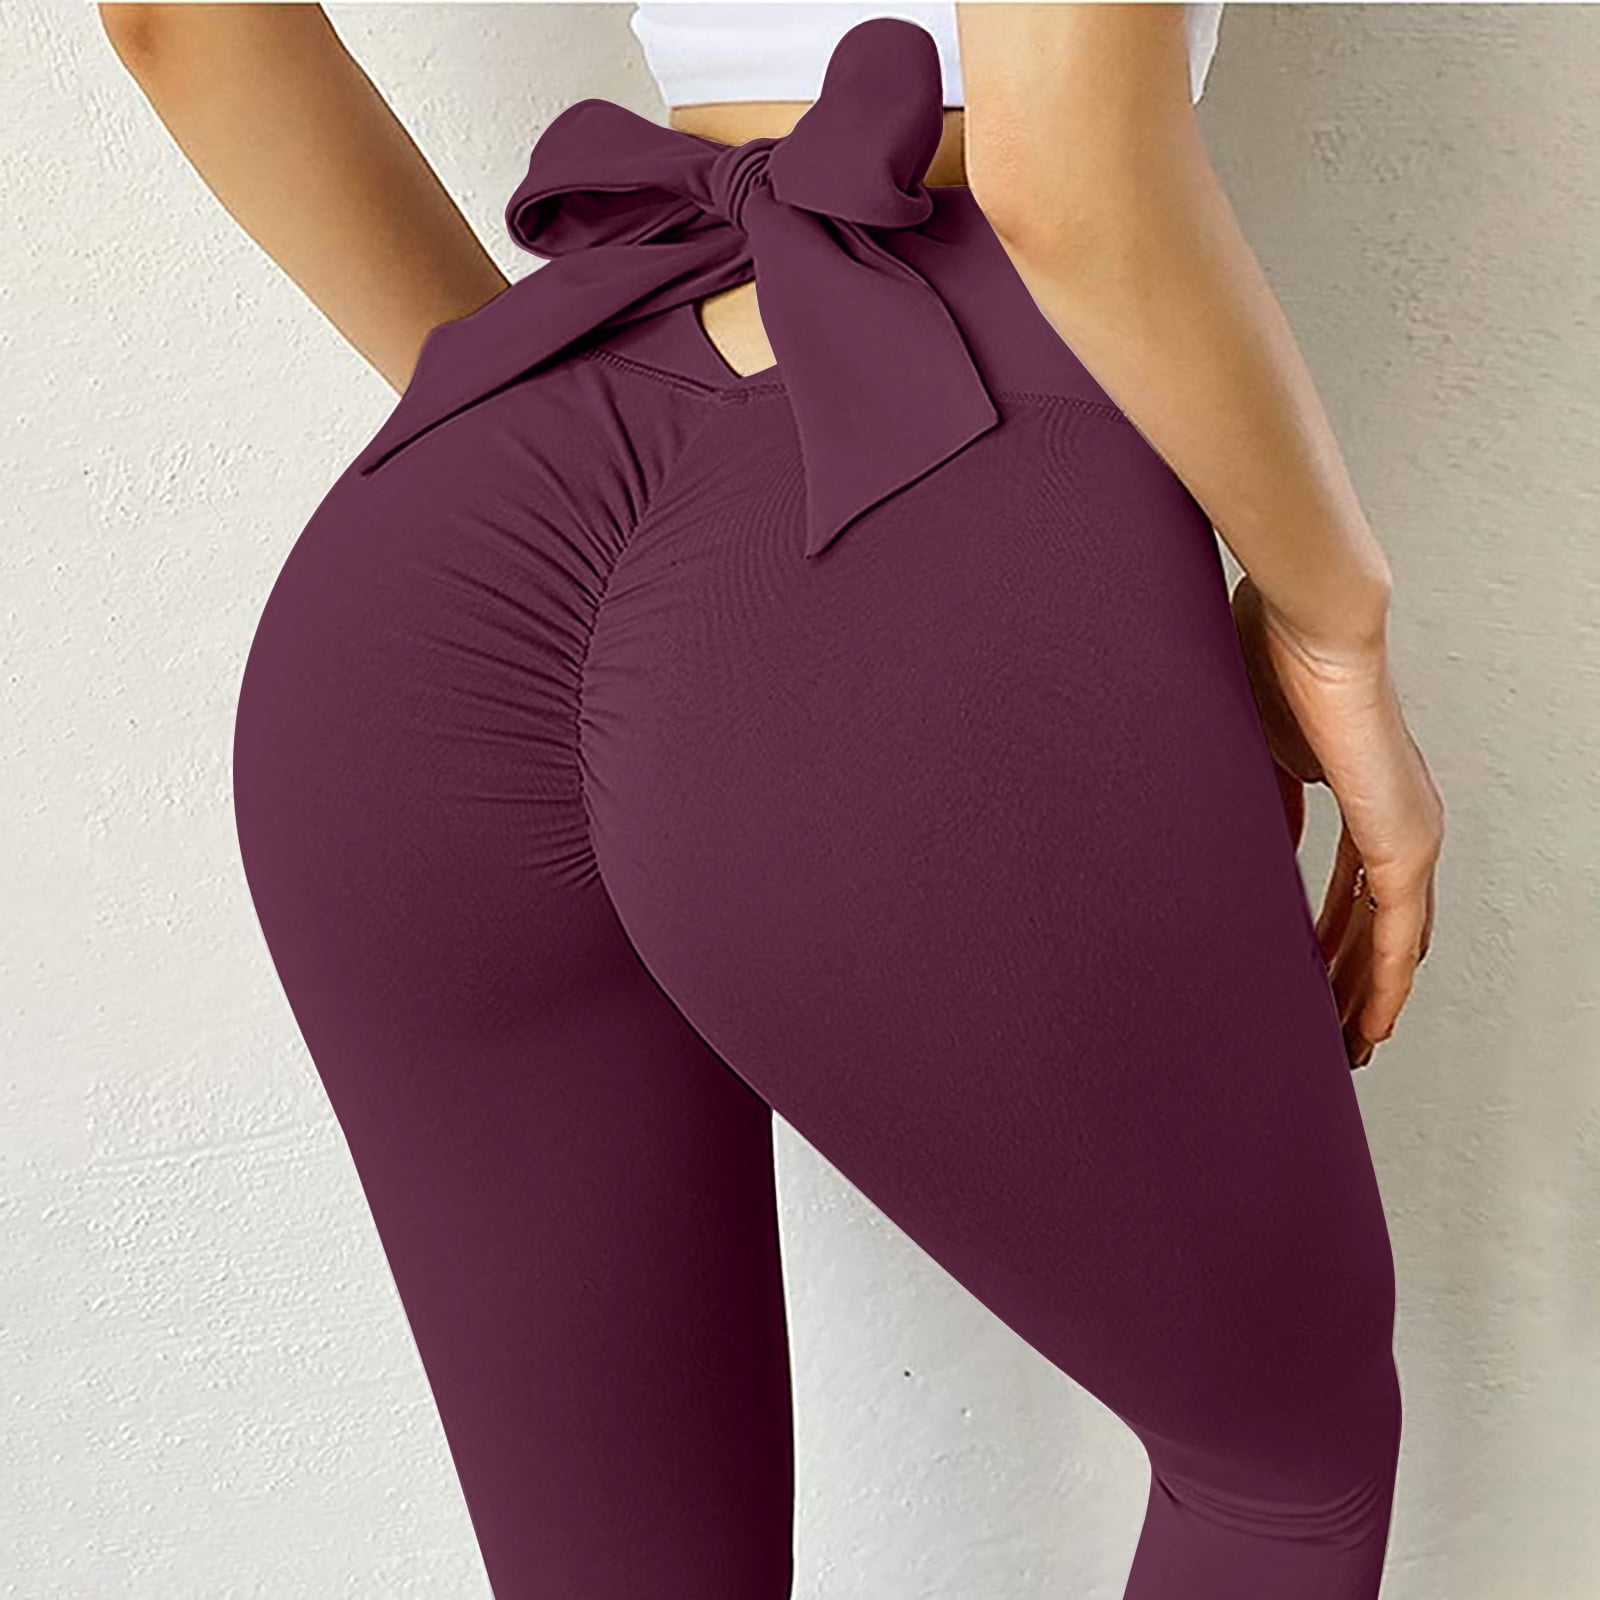 Abcnature Yoga Pants for Women with Pockets, High Waisted Athletic Running  Workout Leggings 7/8 Length, Ladies Hip Lifting Elastic Leggings with Bow  Wine XL 